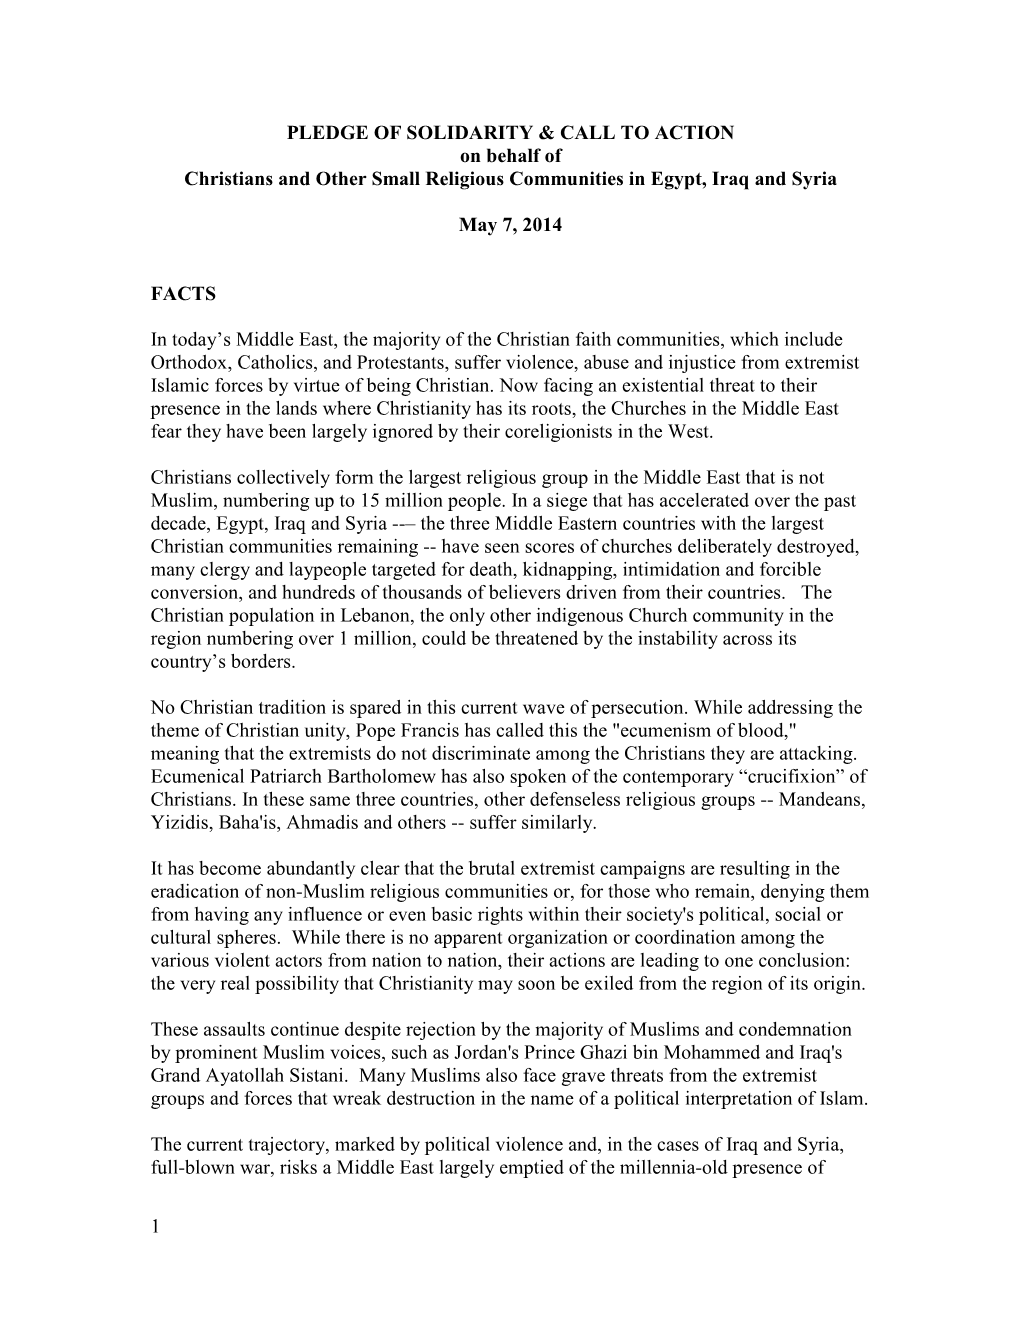 1 PLEDGE of SOLIDARITY & CALL to ACTION on Behalf of Christians and Other Small Religious Communities in Egypt, Iraq And